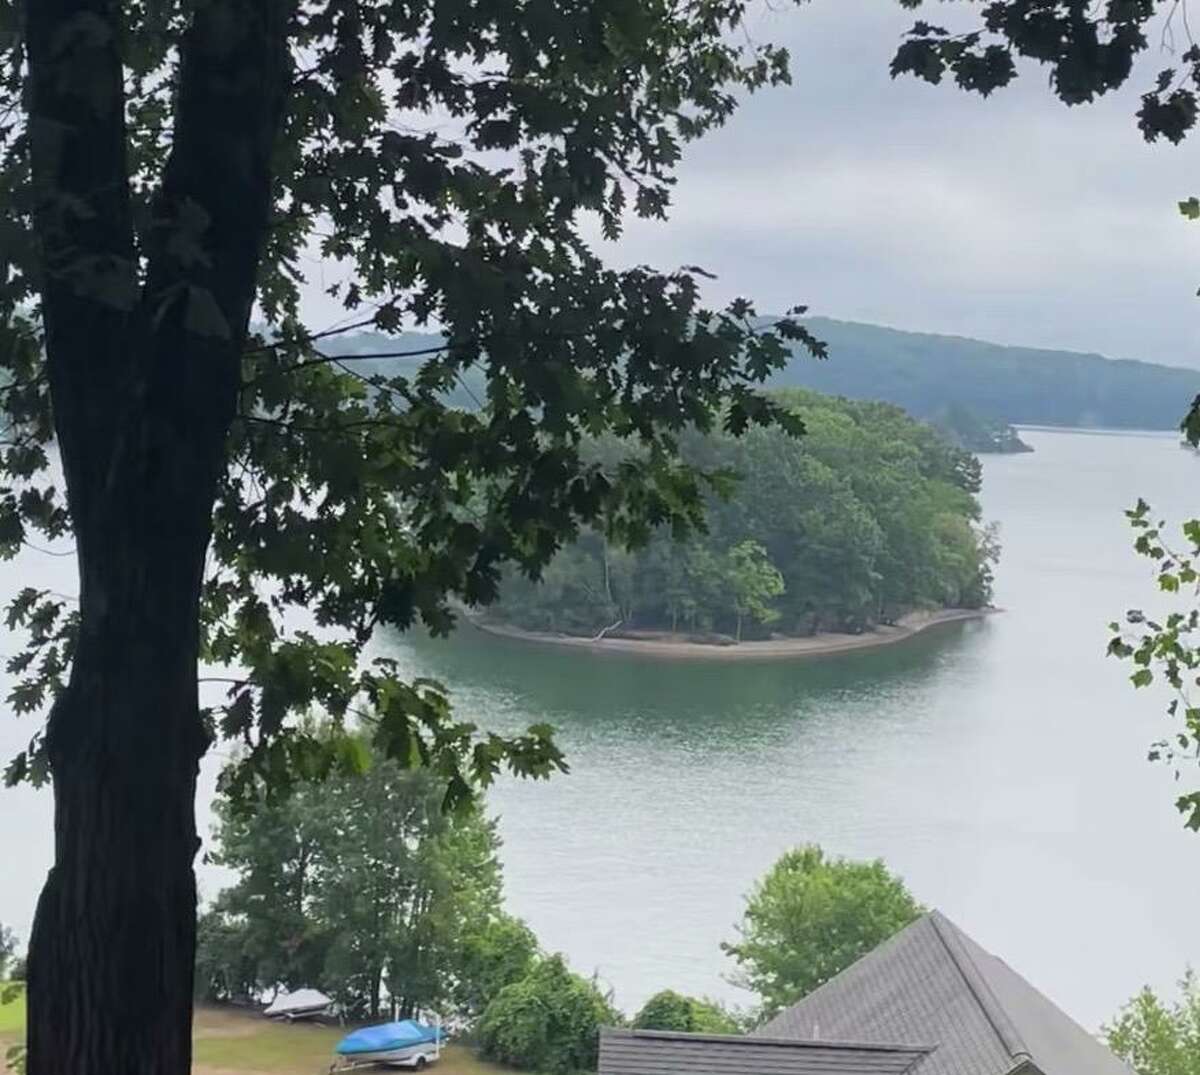 View of Blueberry Island from Wood Creek Road on Labor Day 2022. Residents in the area reported a quieter-than-usual holiday weekend since the island was shut down due to unsanitary conditions.